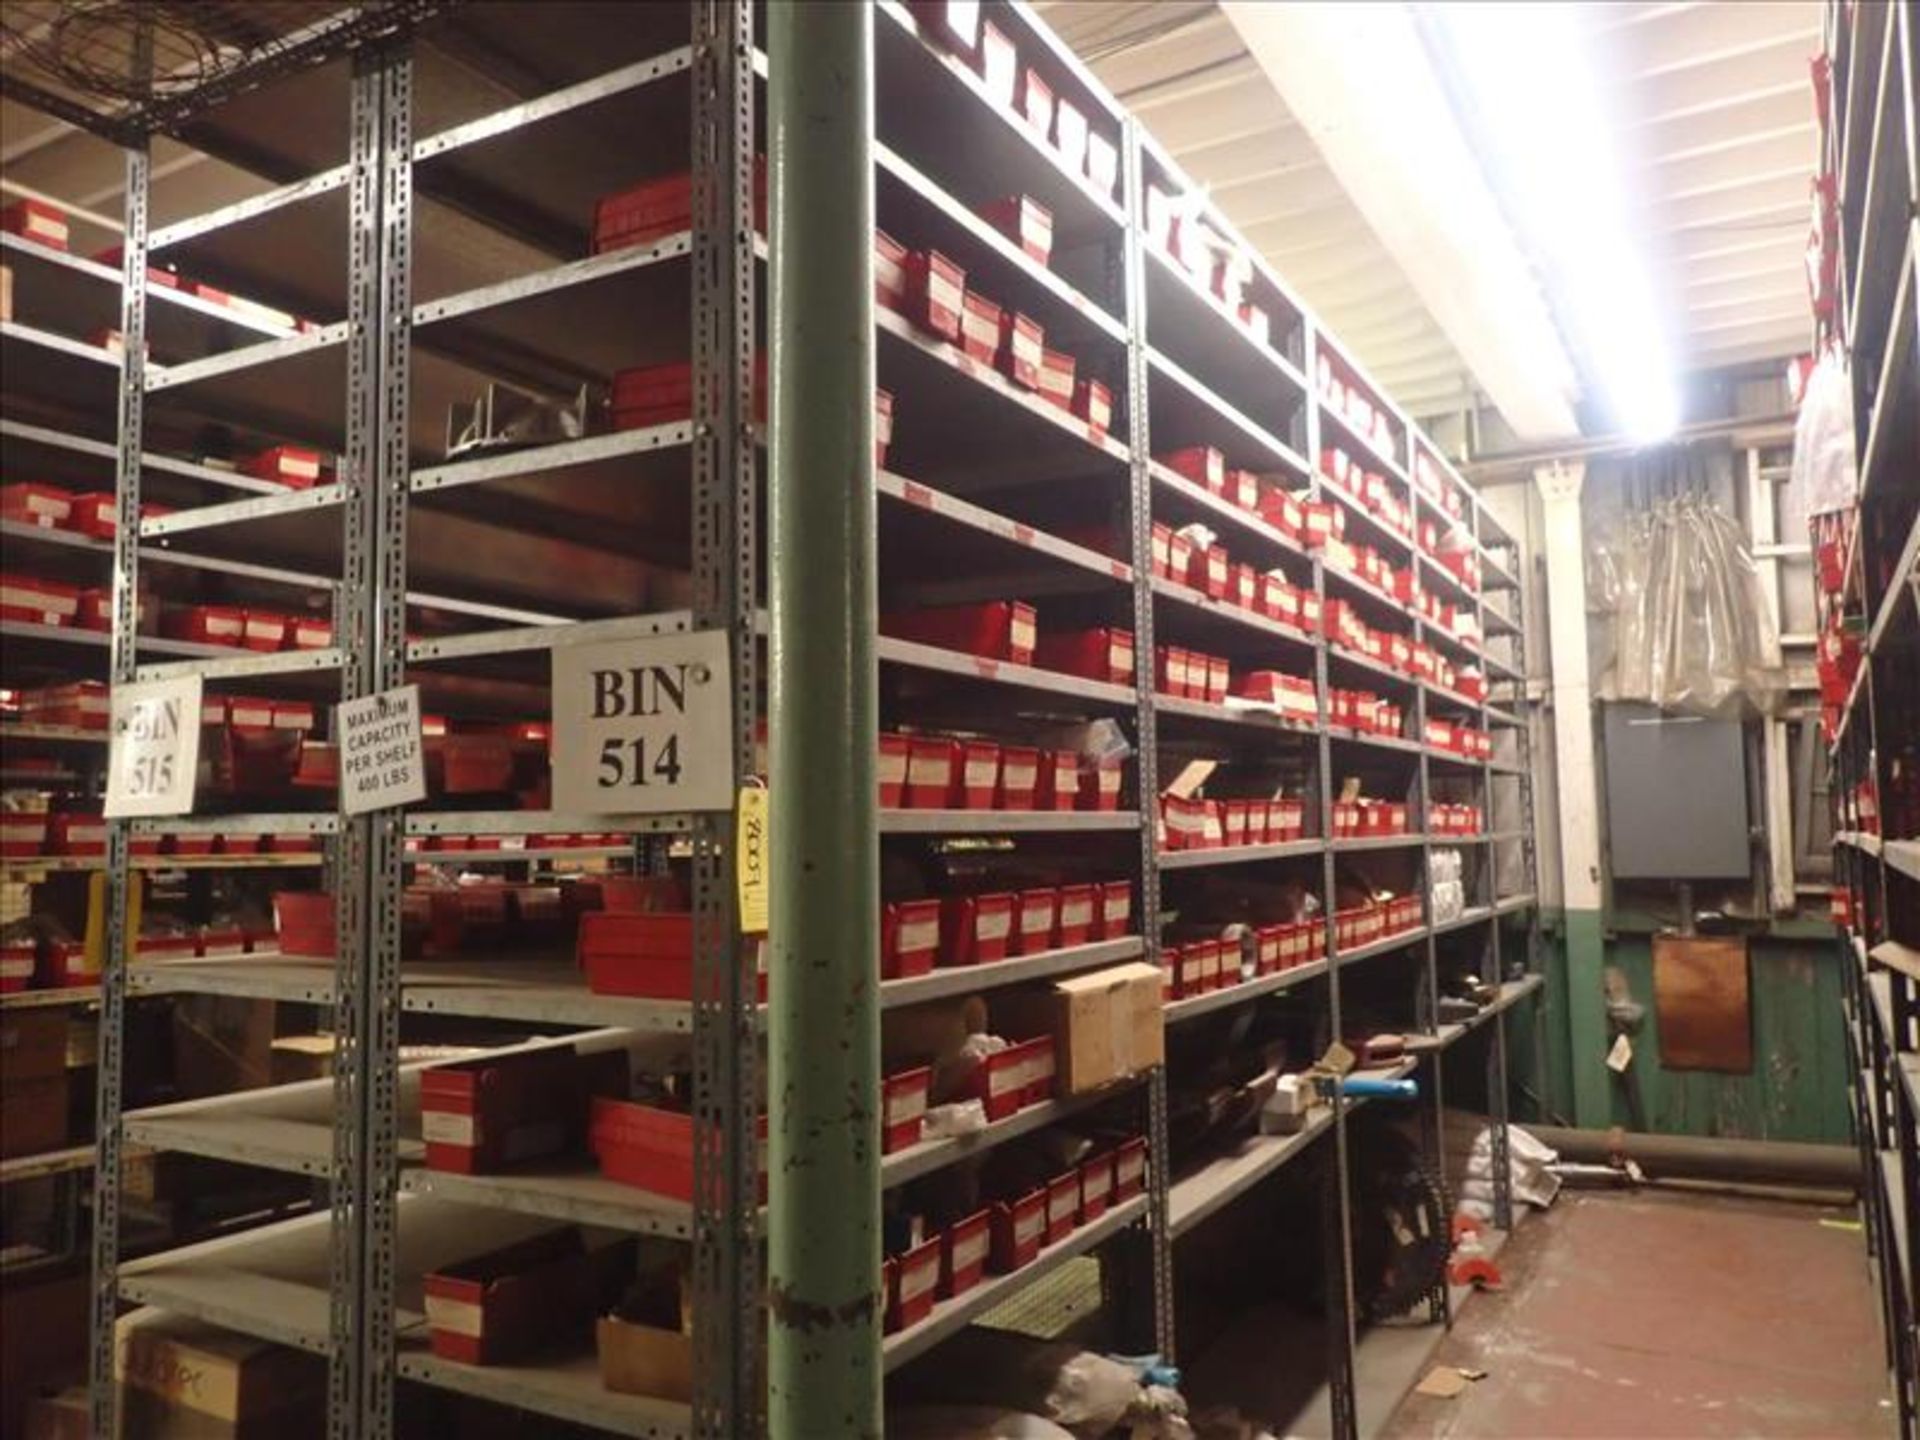 contents of shelving: gaskets, bushings, shafts, spare parts, etc. (Bin 514) (Tag 8009 Loc WH